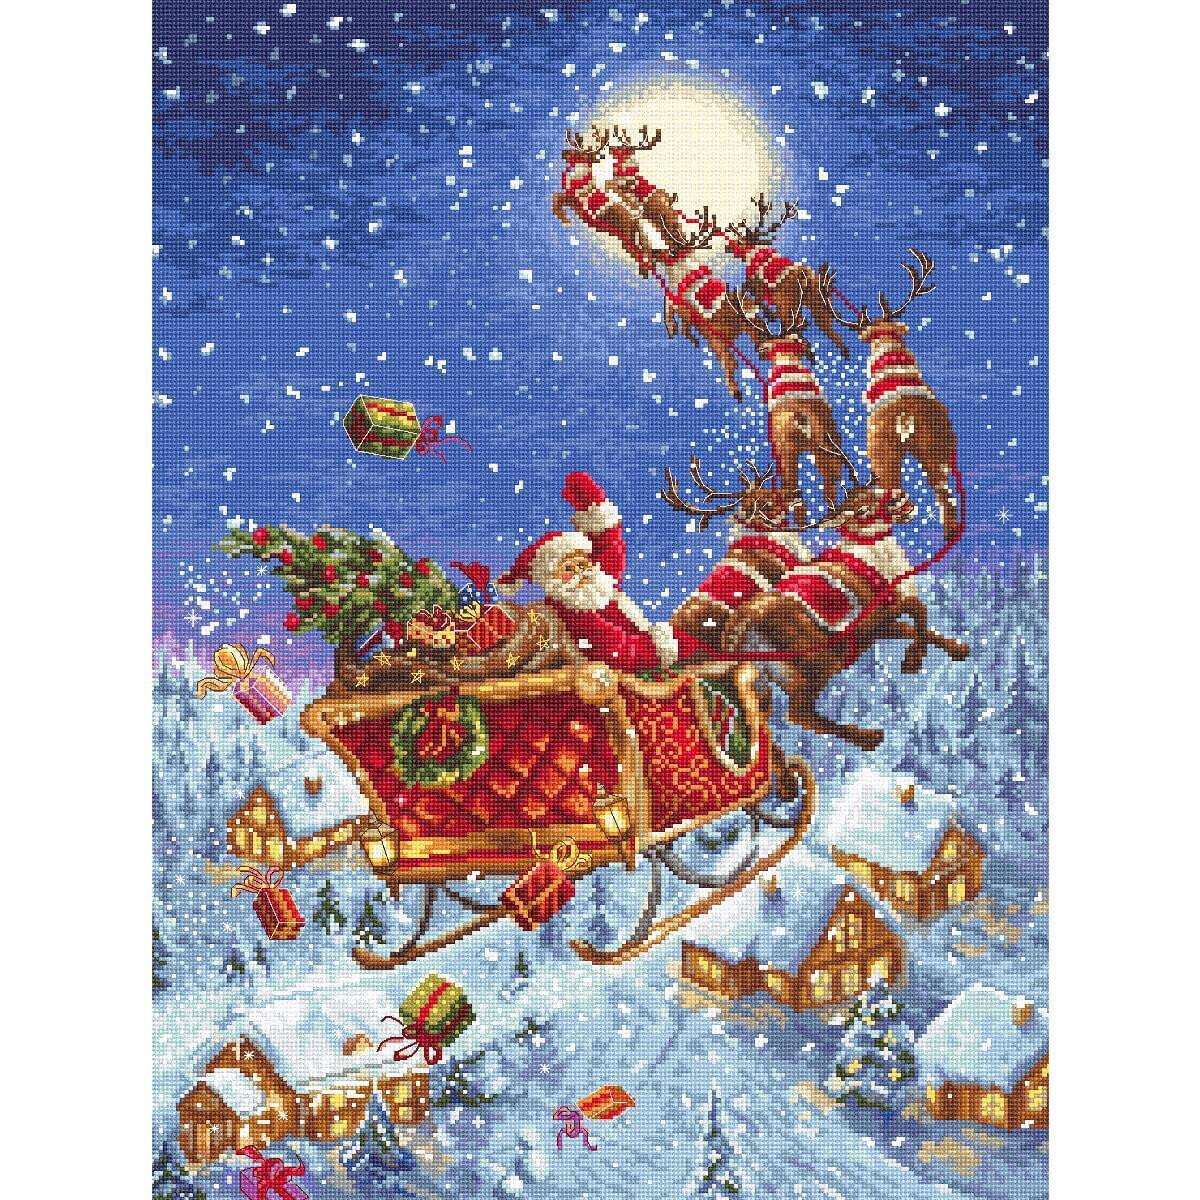 Santa Claus in a red suit and hat flies in a red sleigh...